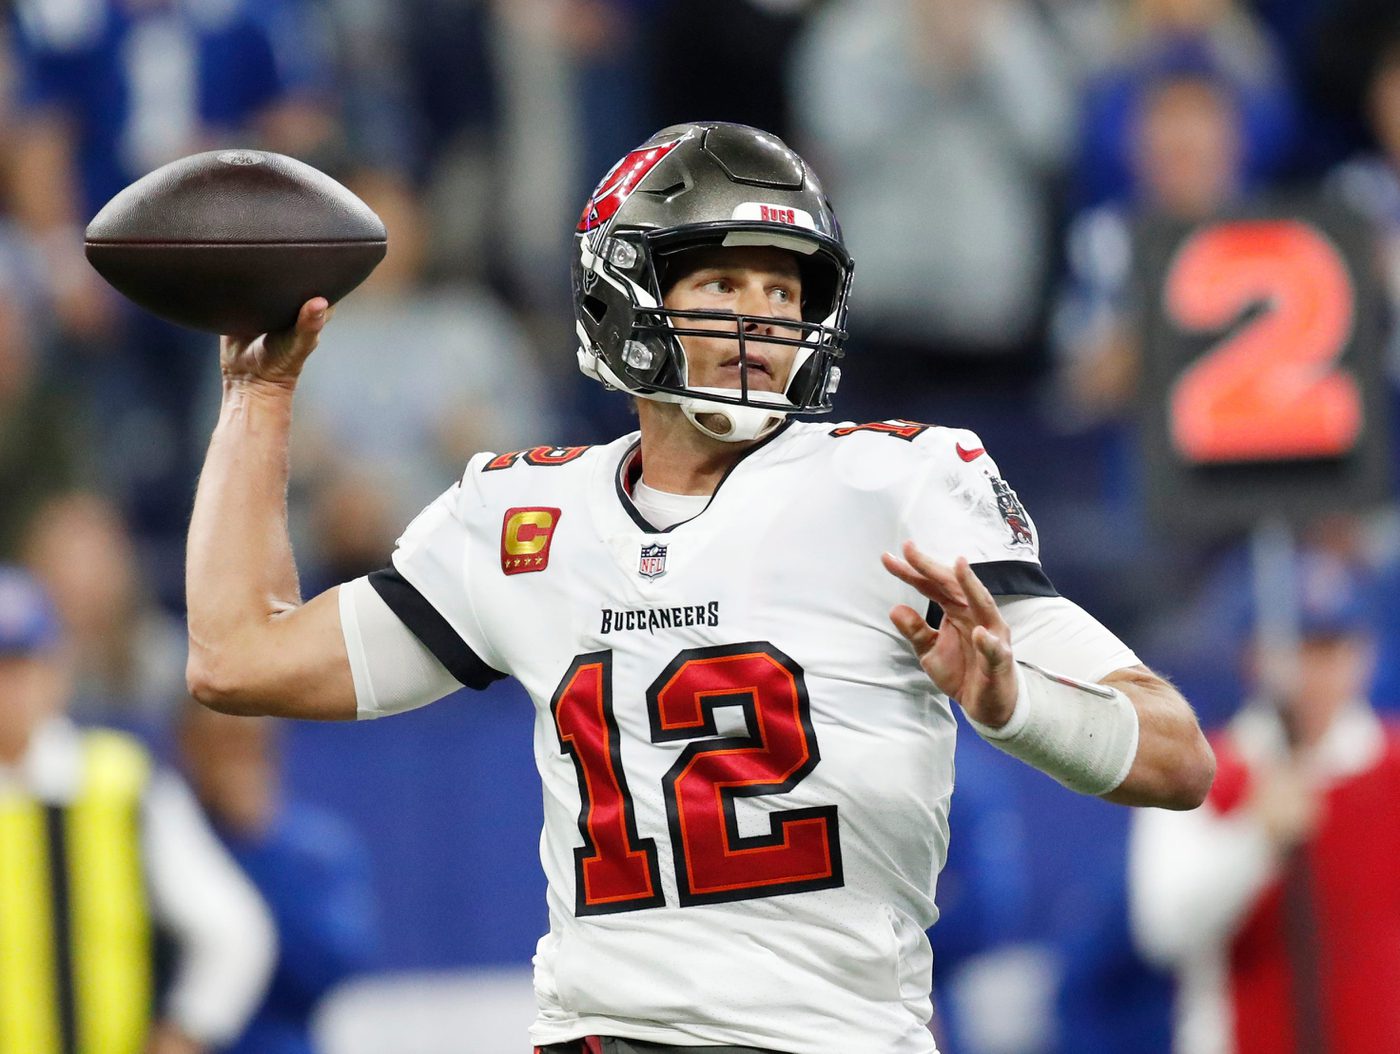 Tampa Bay Buccaneers quarterback Tom Brady (12) throws Sunday, Nov. 28, 2021, during a game against the Tampa Bay Buccaneers at Lucas Oil Stadium in Indianapolis. Tampa Bay won 38-31.